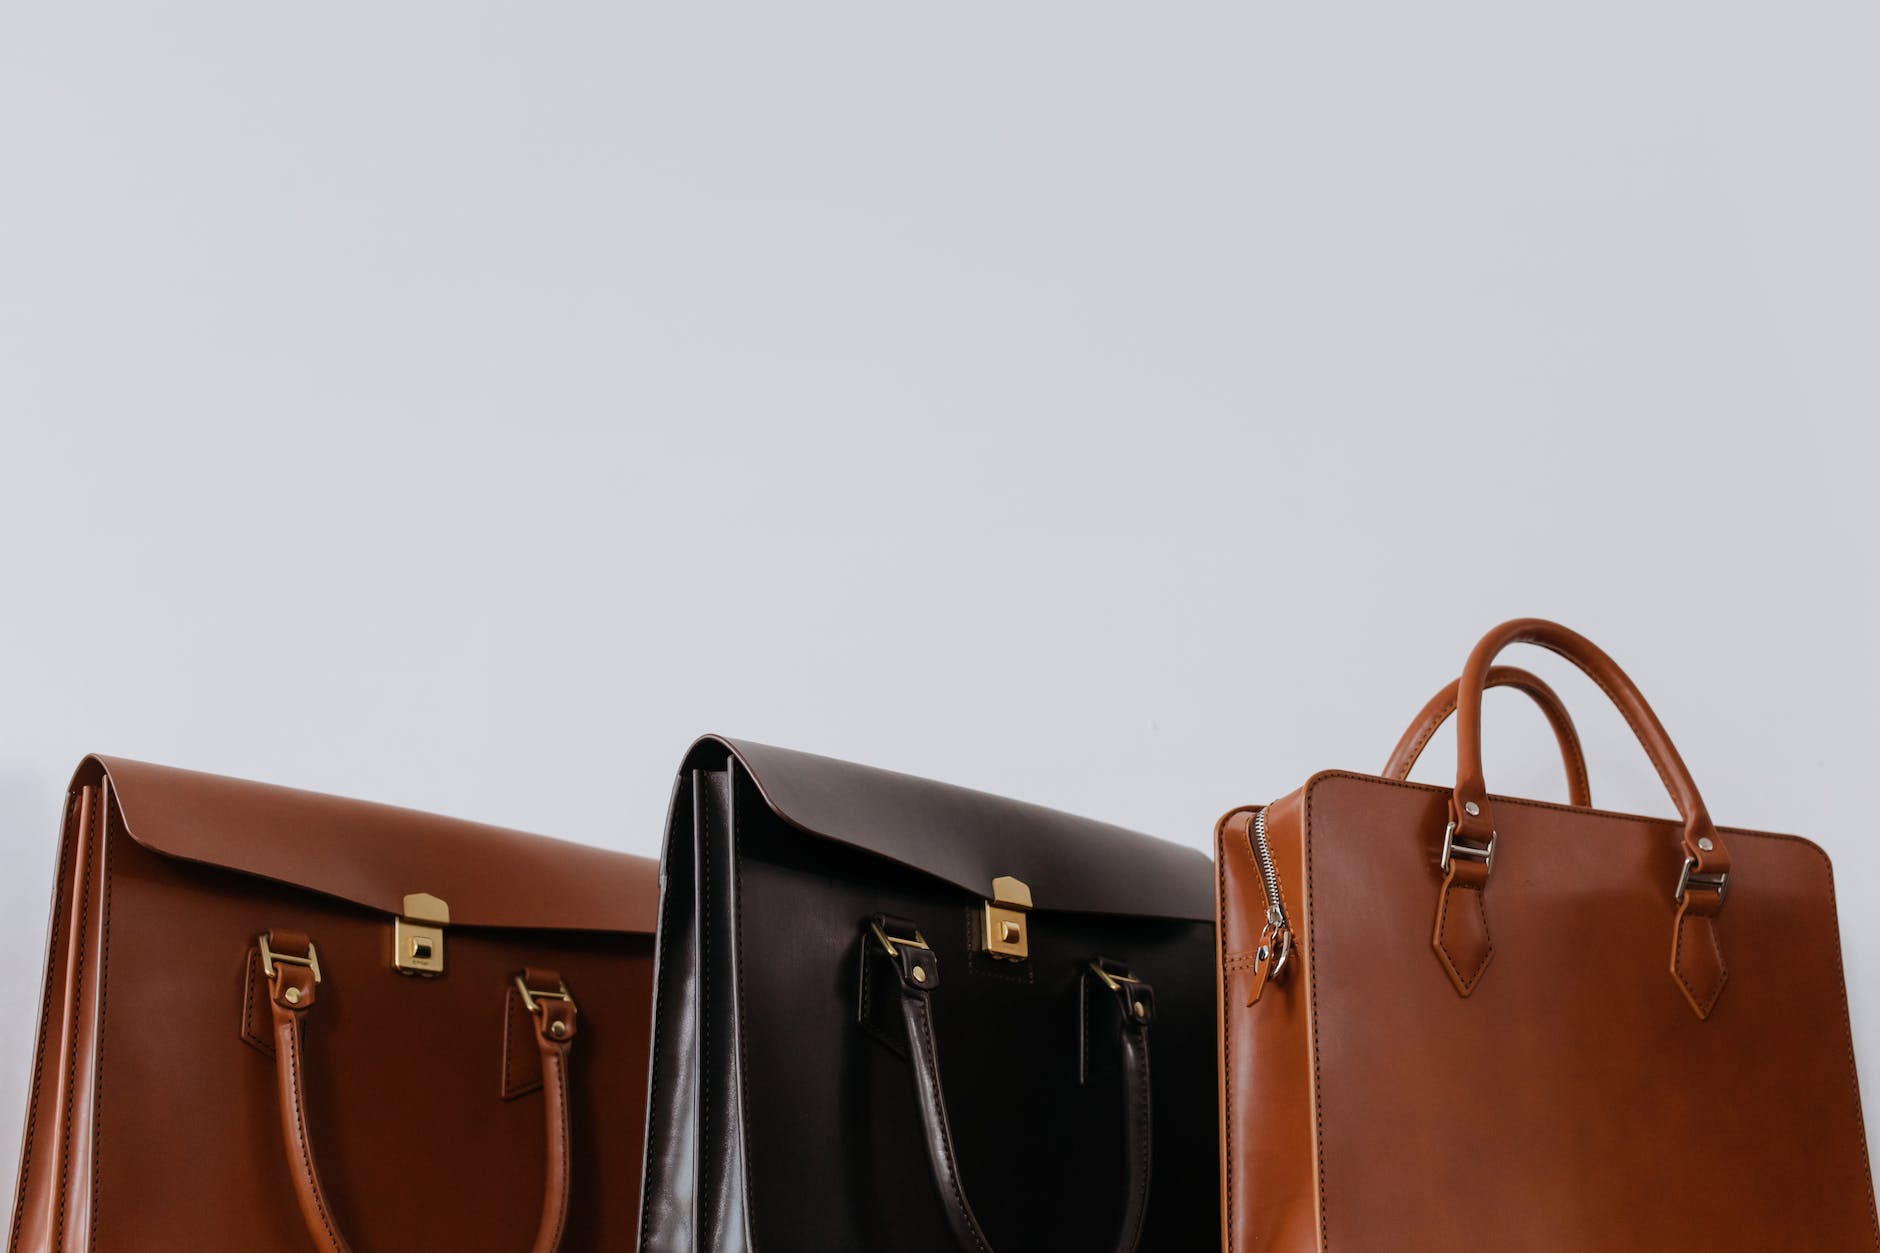 brown and black leather bags in close up photography